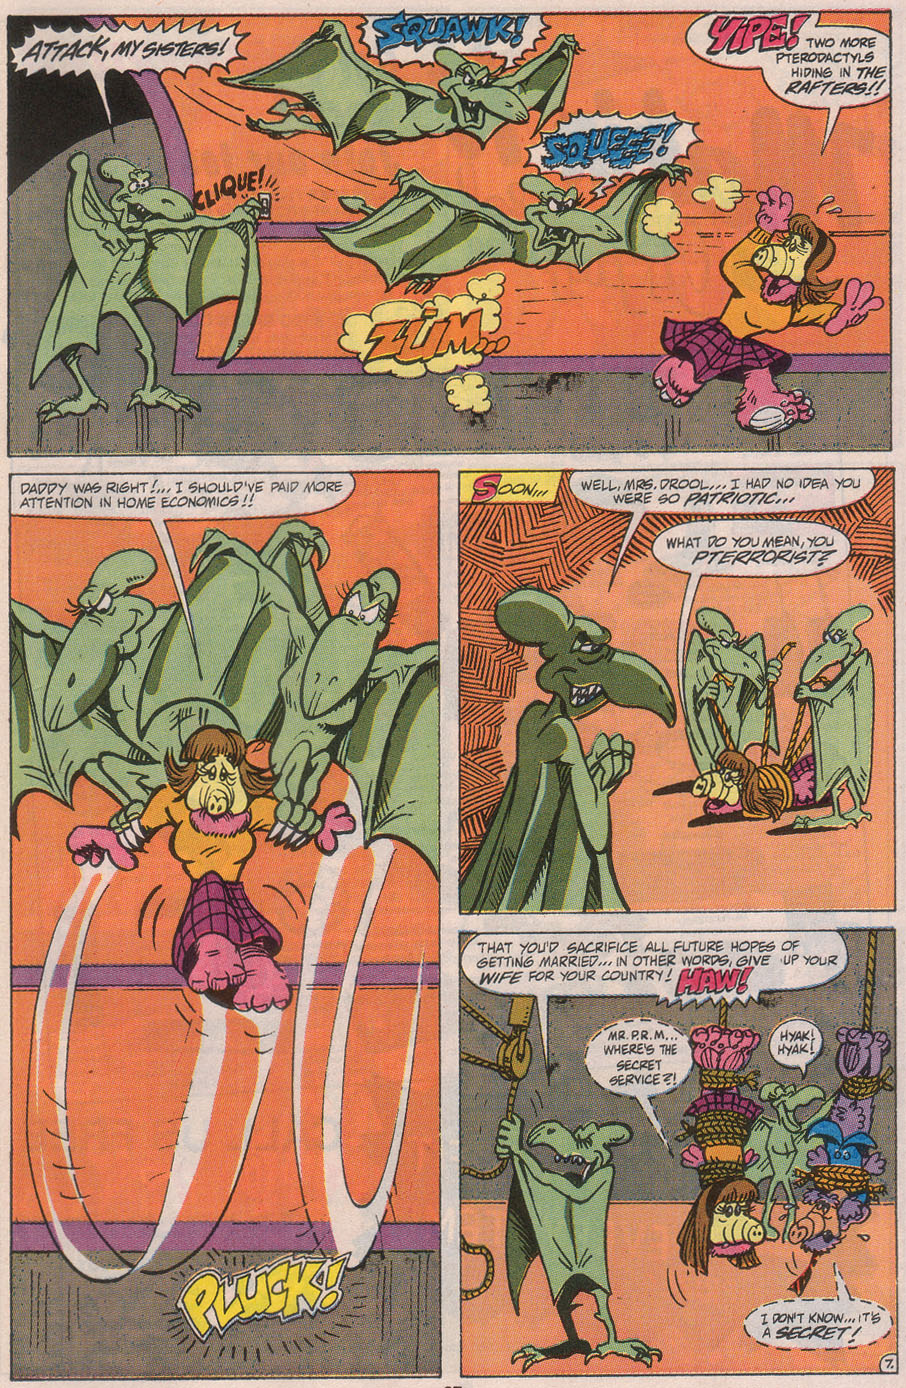 Alf Issue 45 | Read Alf Issue 45 comic online in high 